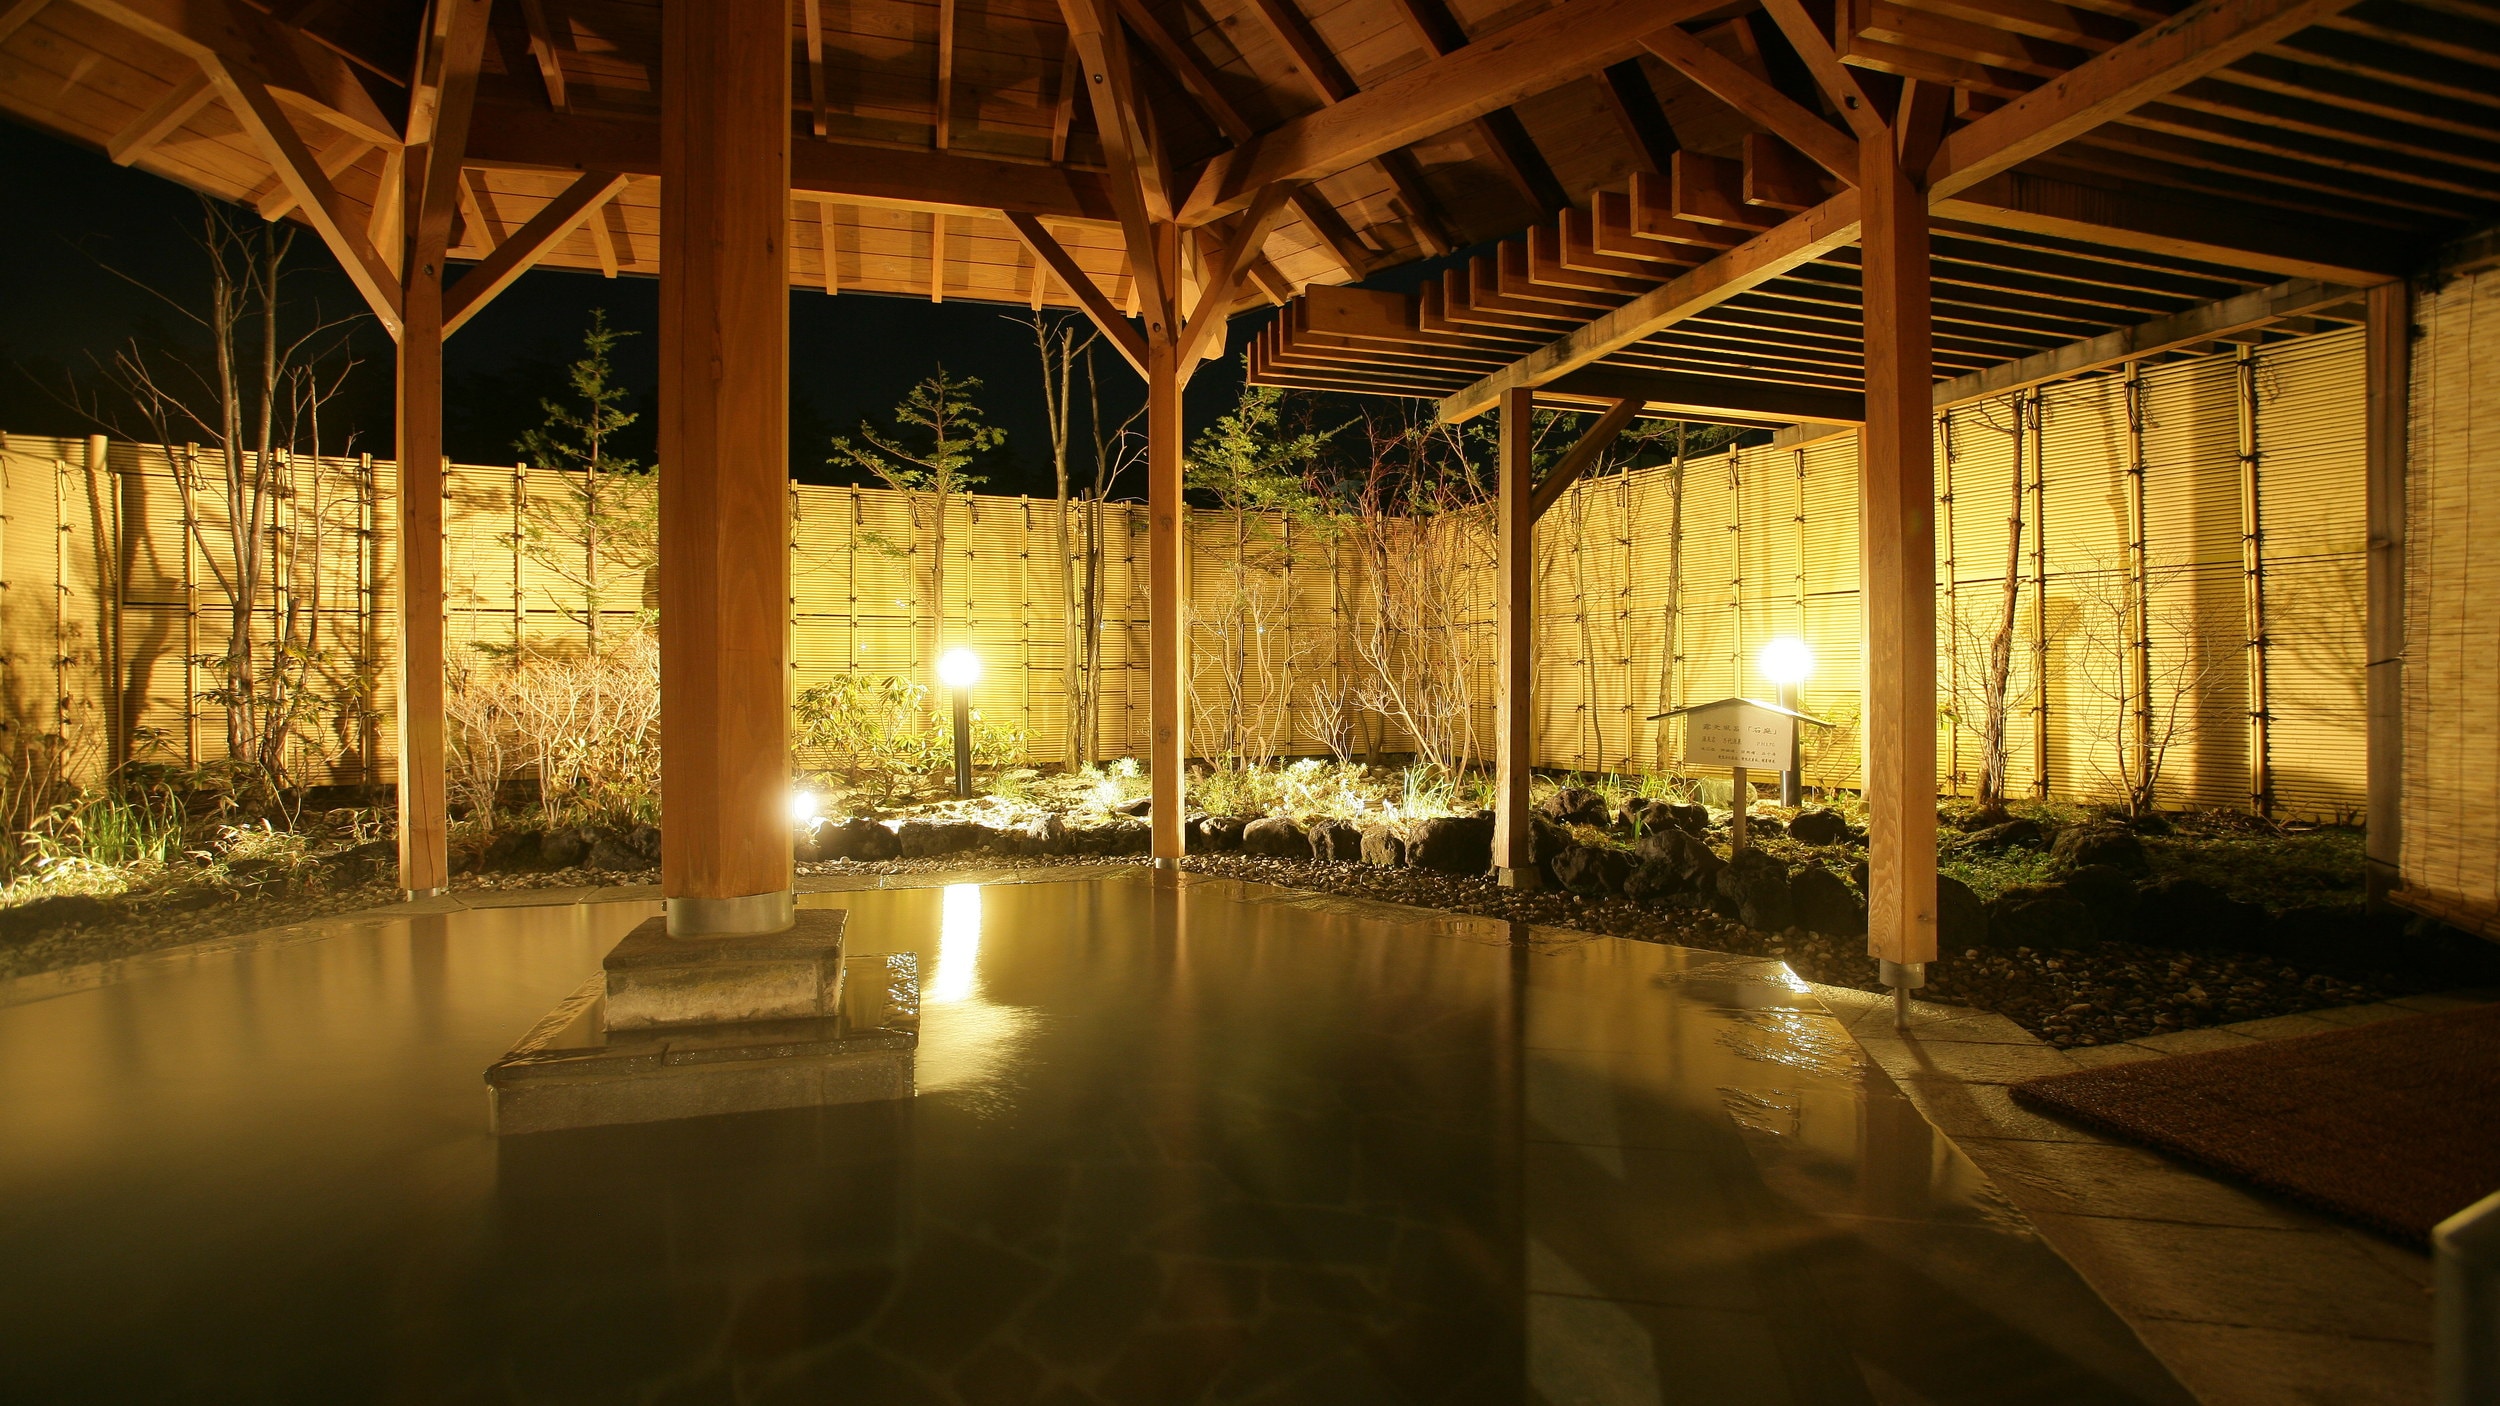 The open-air bath at night has a magical atmosphere